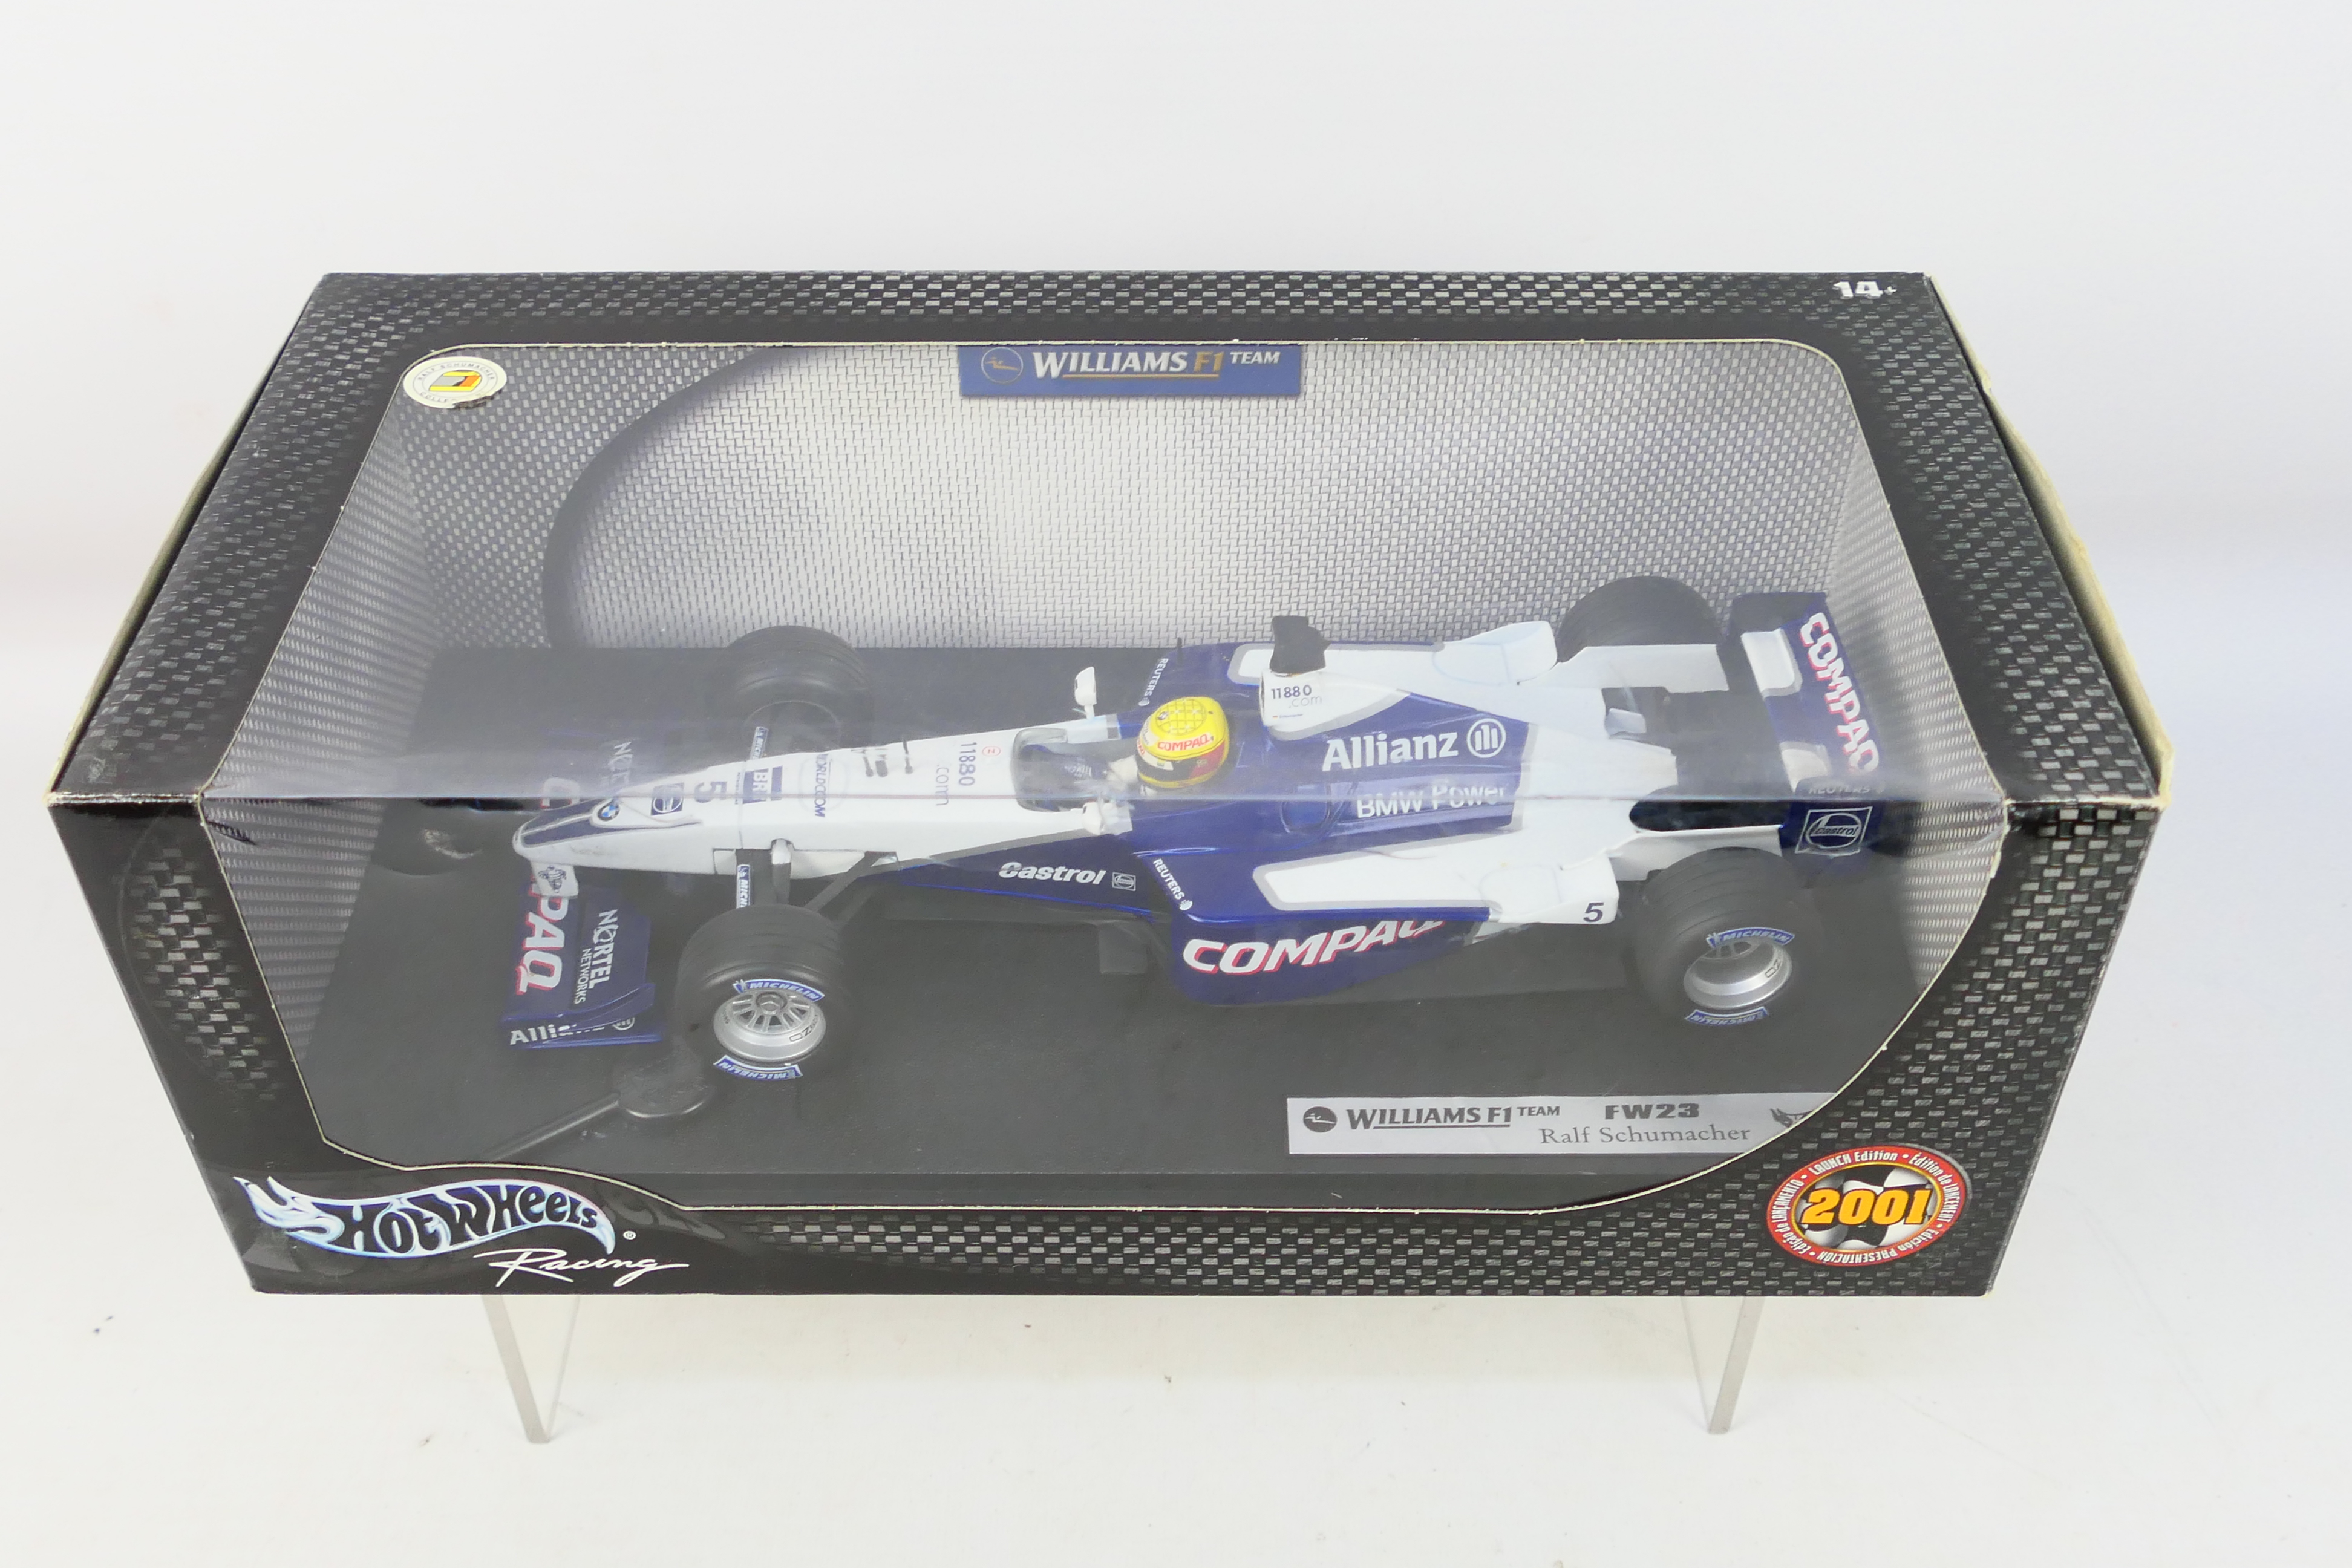 Hot Wheels - A boxed 1:18 scale Williams FW23 Ralf Schumacher 2001 F1 car # 50168. - Image 3 of 3